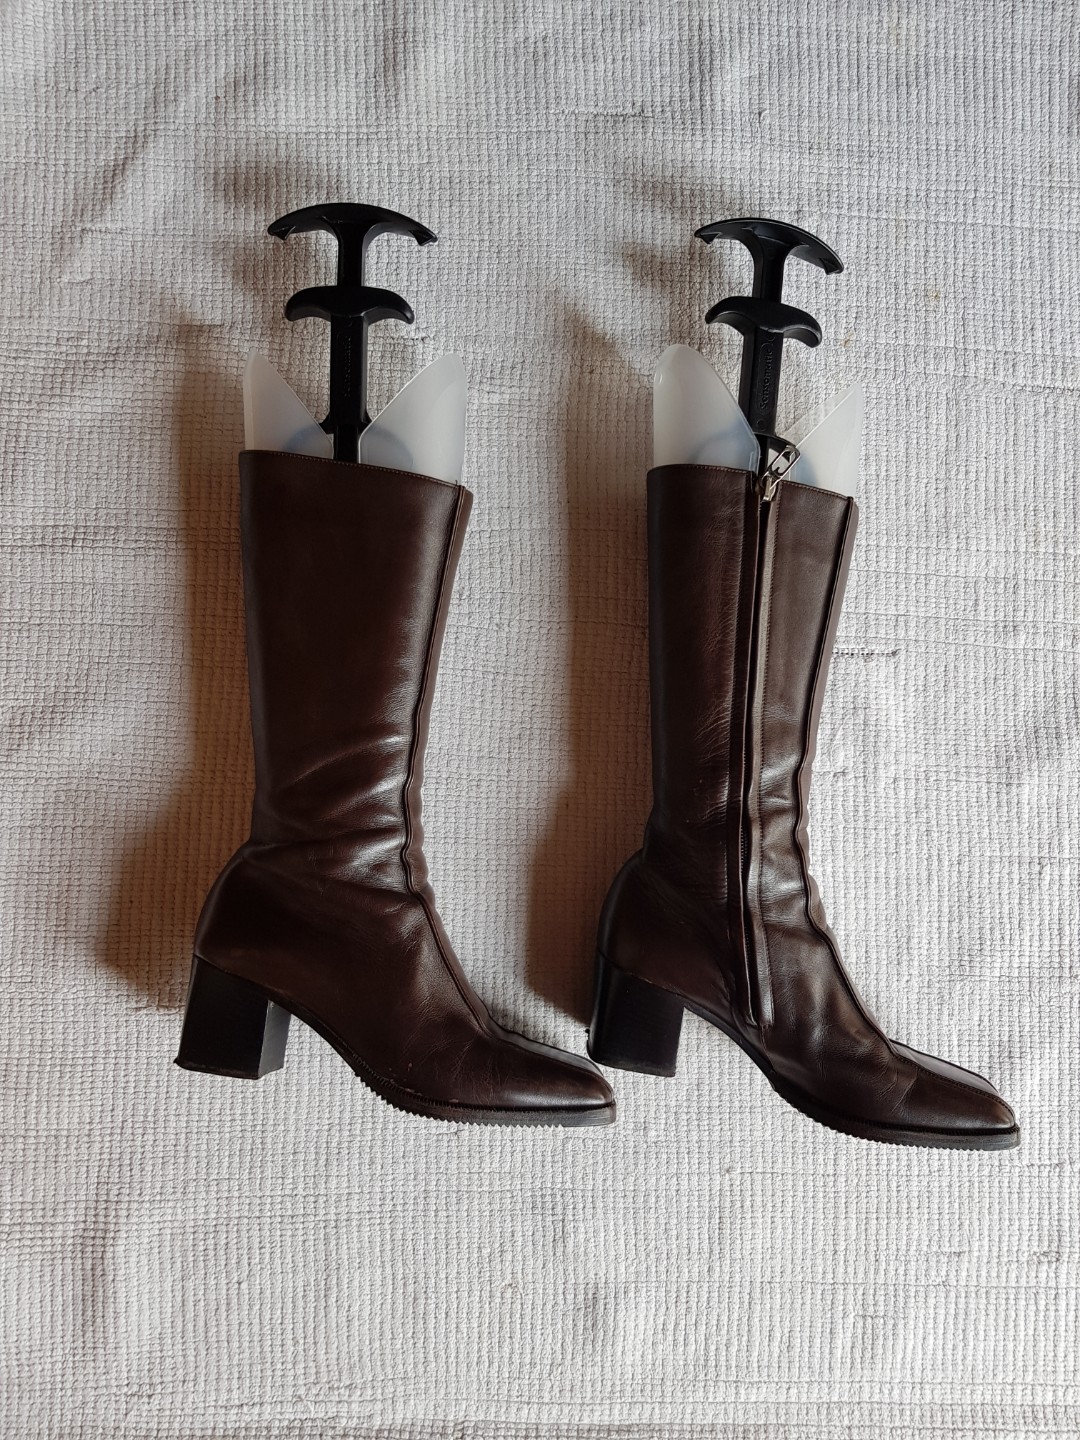 vintage gucci riding boots